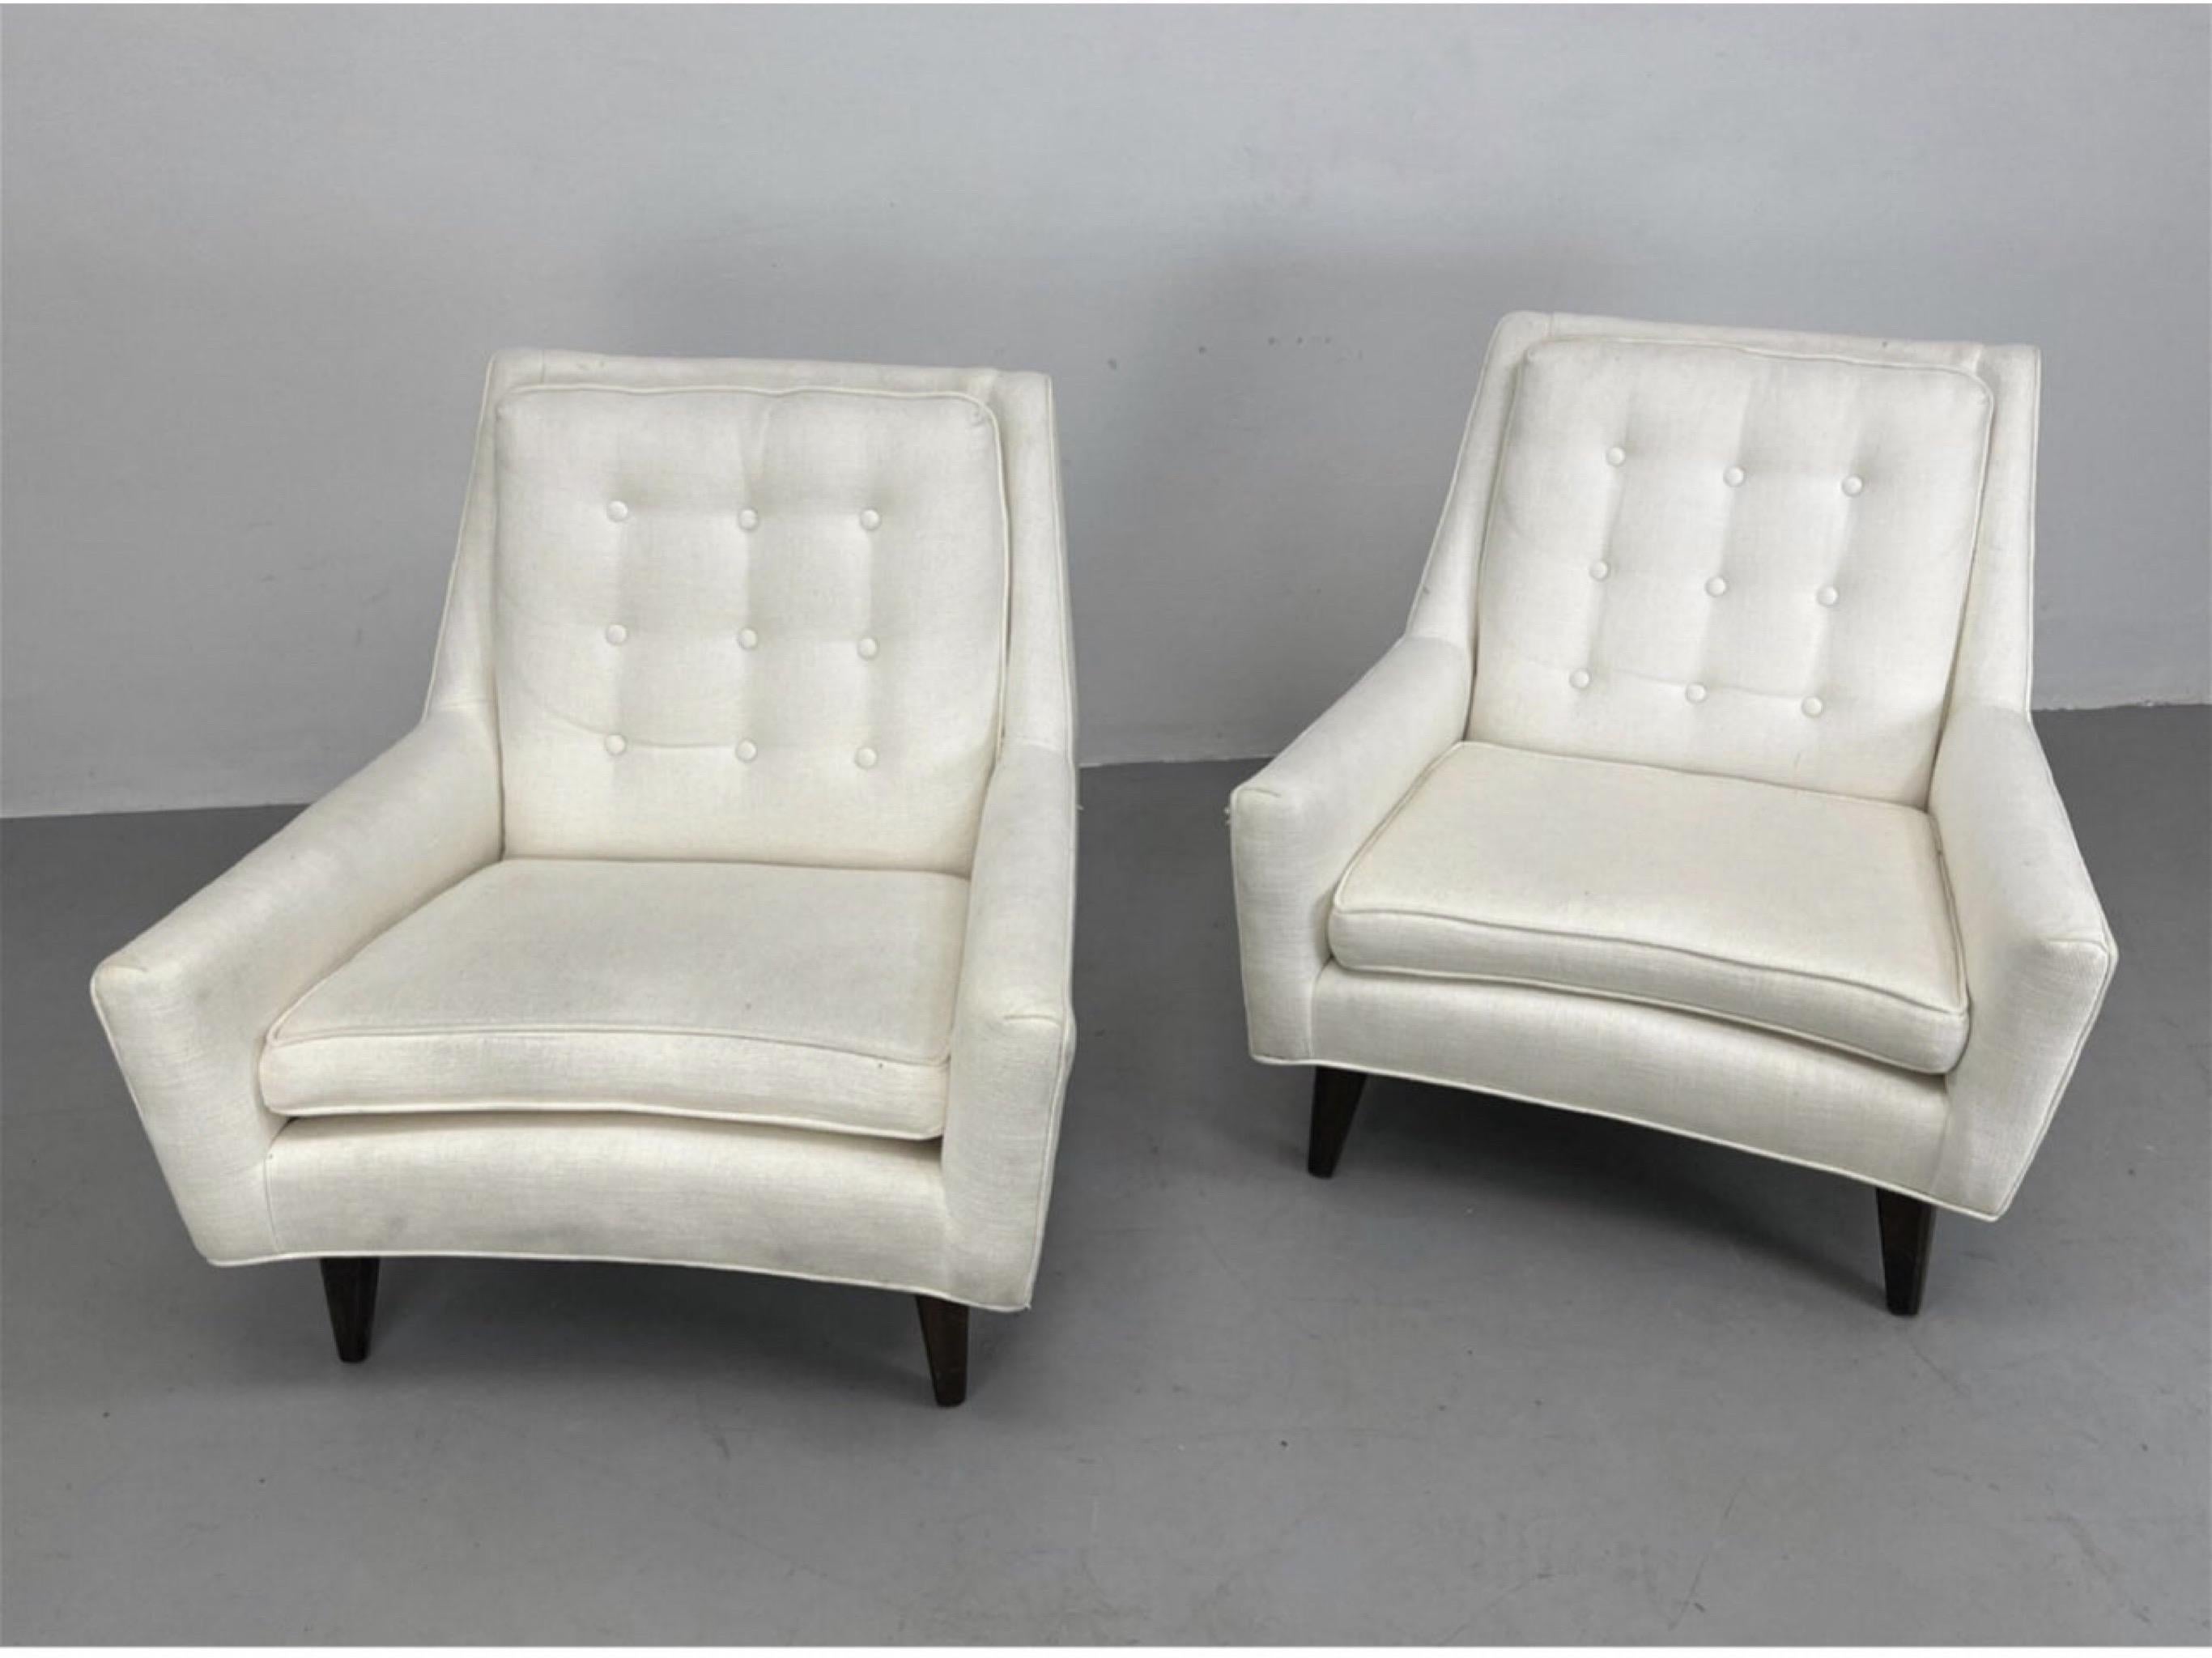 Pair White Upholstered Lounge Chairs in the style of Edward Wormley. Dimensions: H: 31 inches: W: 31 inches: D: 34 inches - Seat Height: 17 inches --- the lines on these are just sexy. Button tufted back cushions and sloping arms.    These chairs